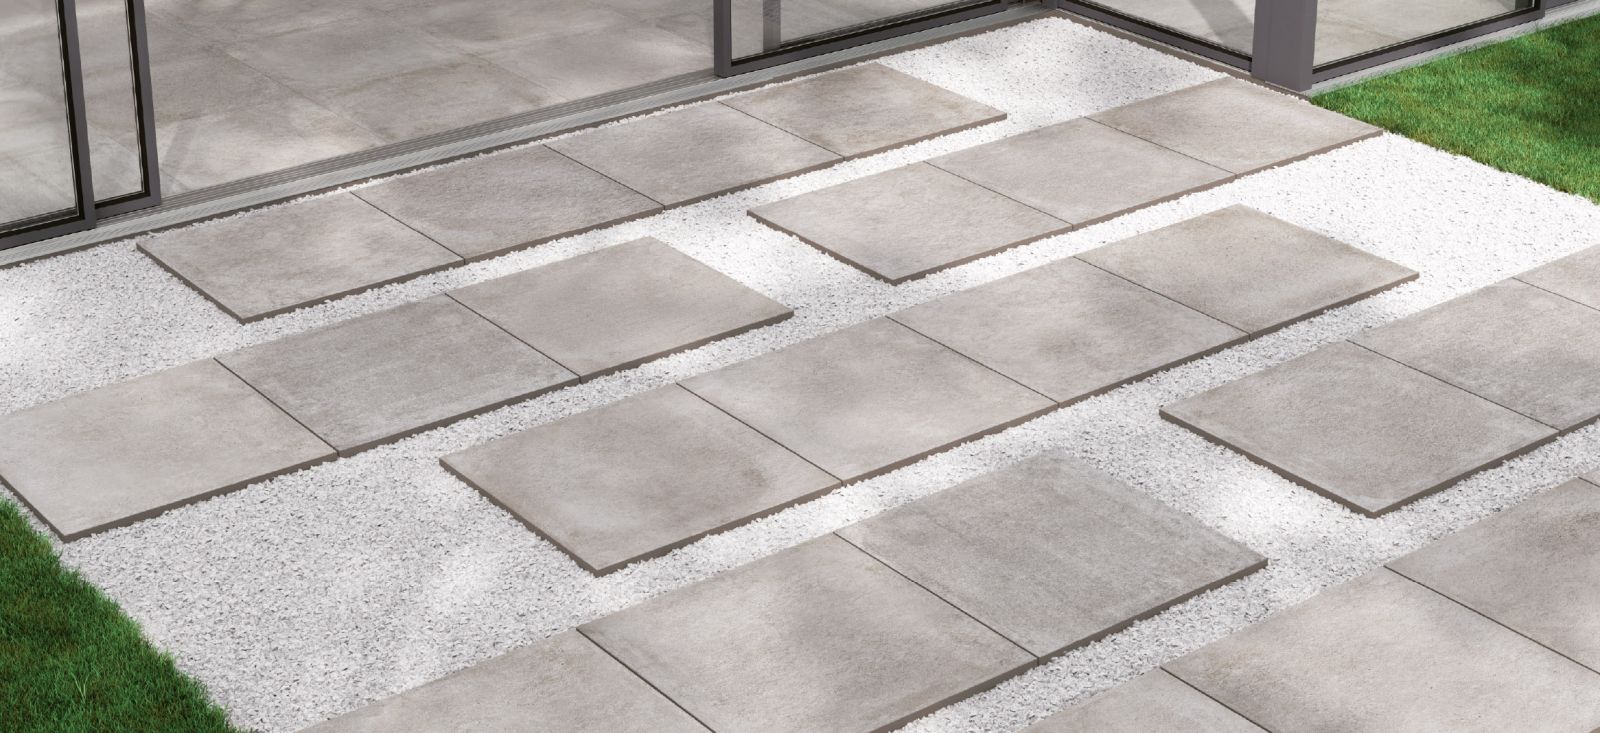 20mm Thick Porcelain Tiles For Outdoor Use, 20mm Outdoor Porcelain Tiles Uk